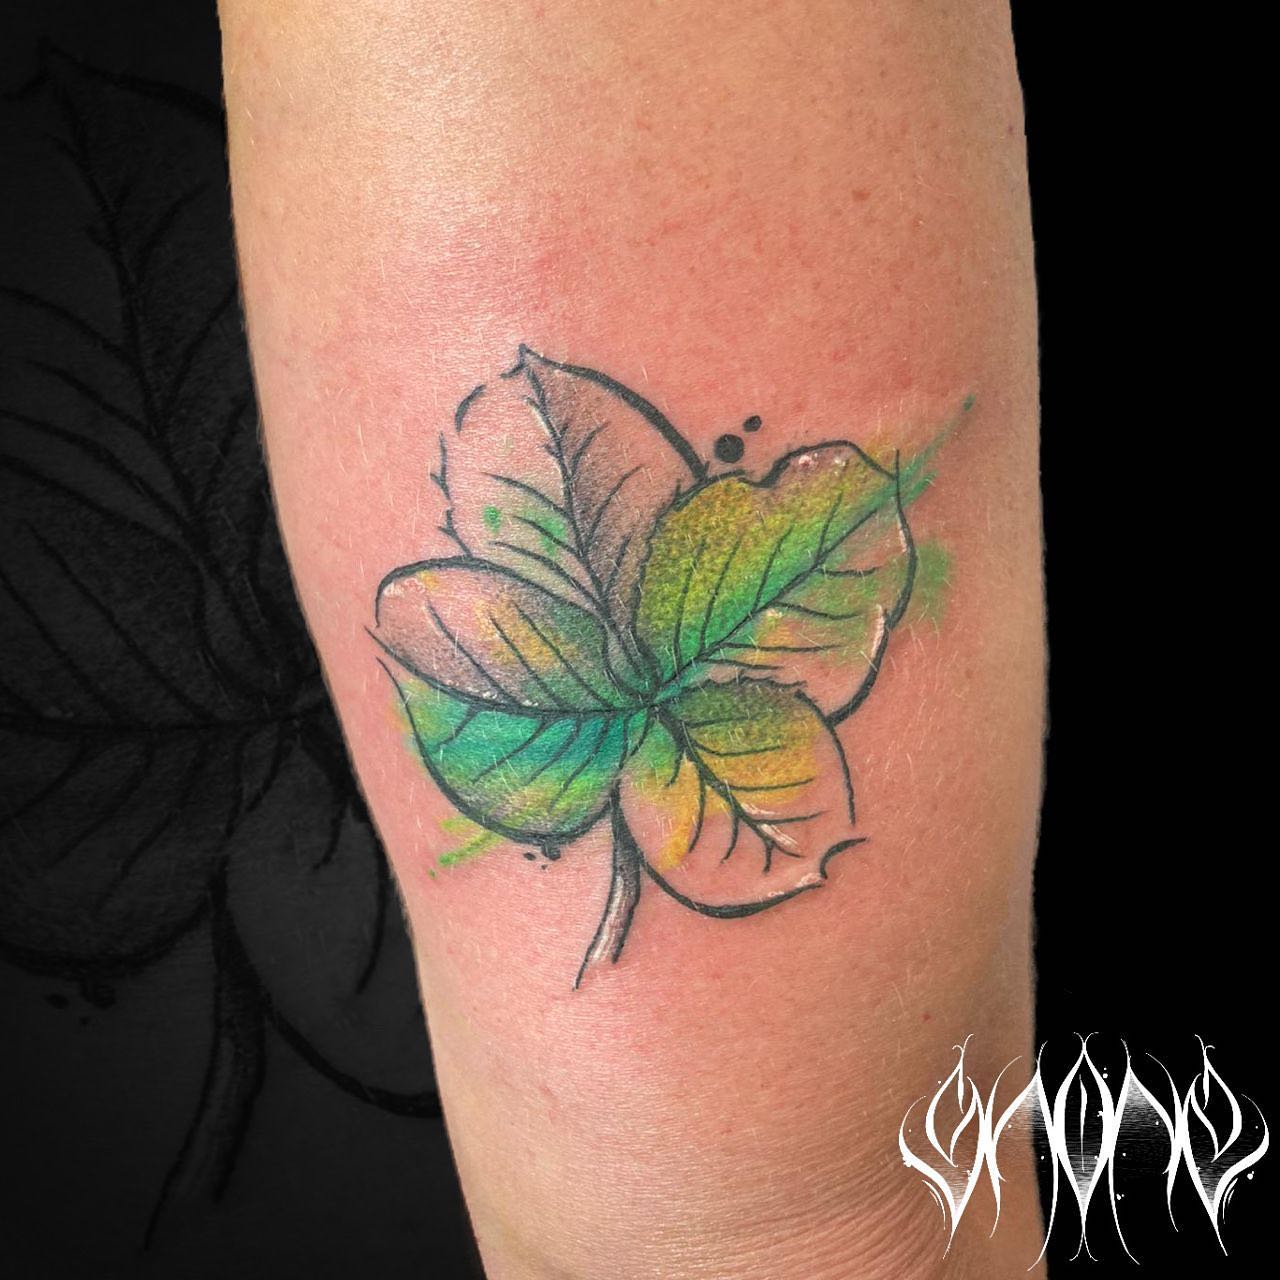 Clovers are associated with luck, especially 4 leaf ones. They are rare but if you can find it, you are sure to bring luck to your life. To feel this luck, you can get a tattoo of it like the one above. Your 4 leaf clover will always be with you.